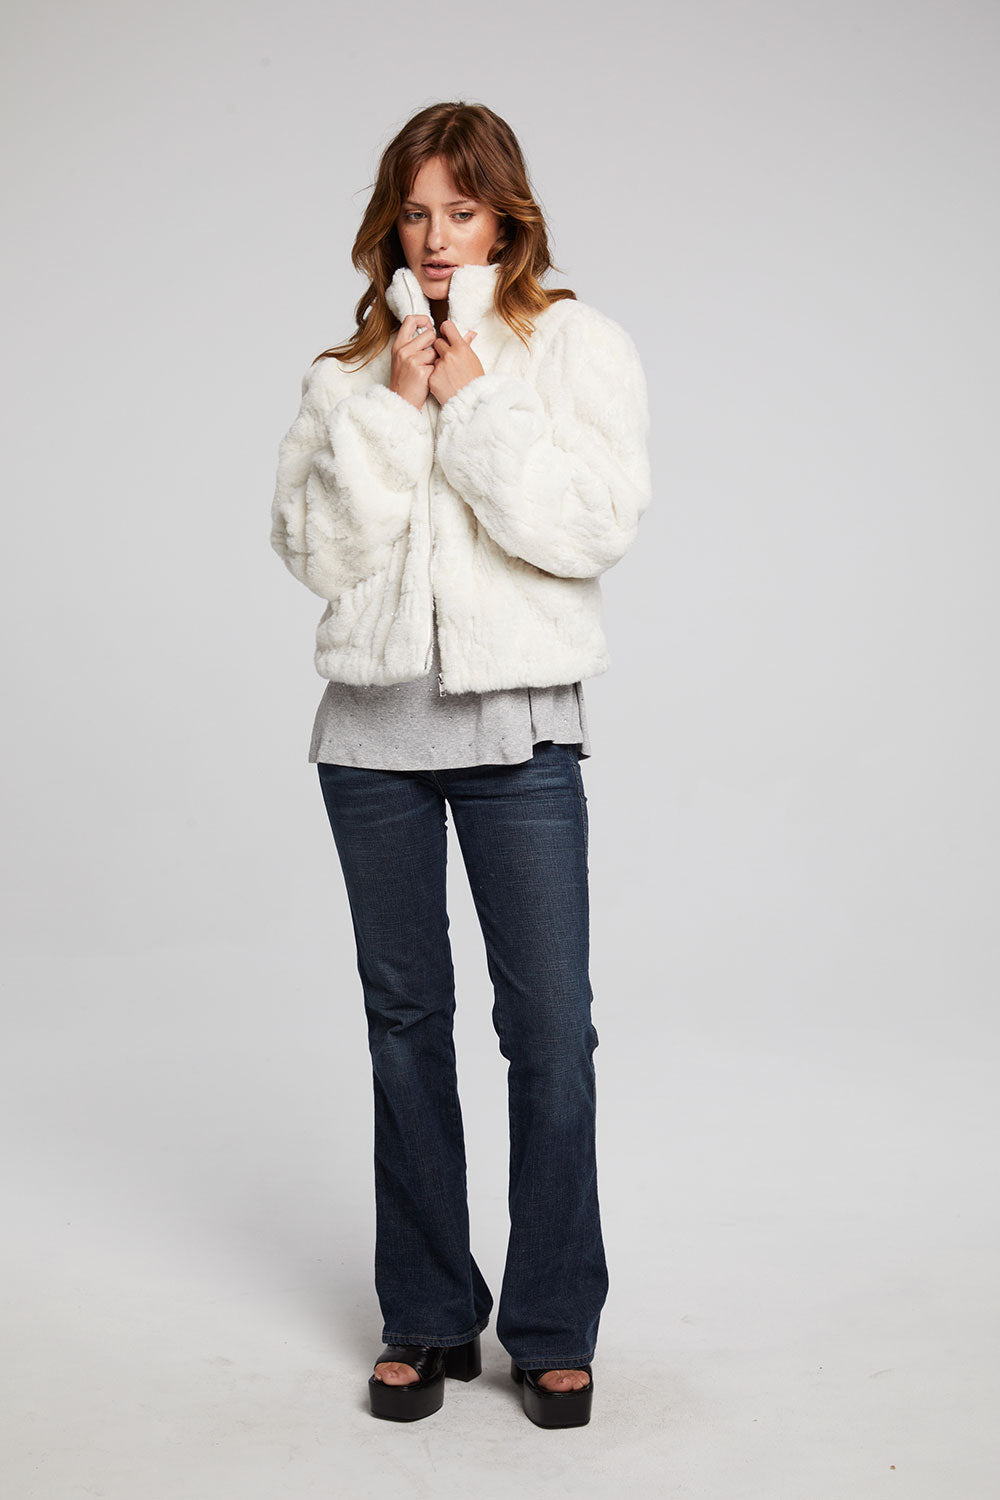 Puff Sleeve Starry White Jacket – chaser